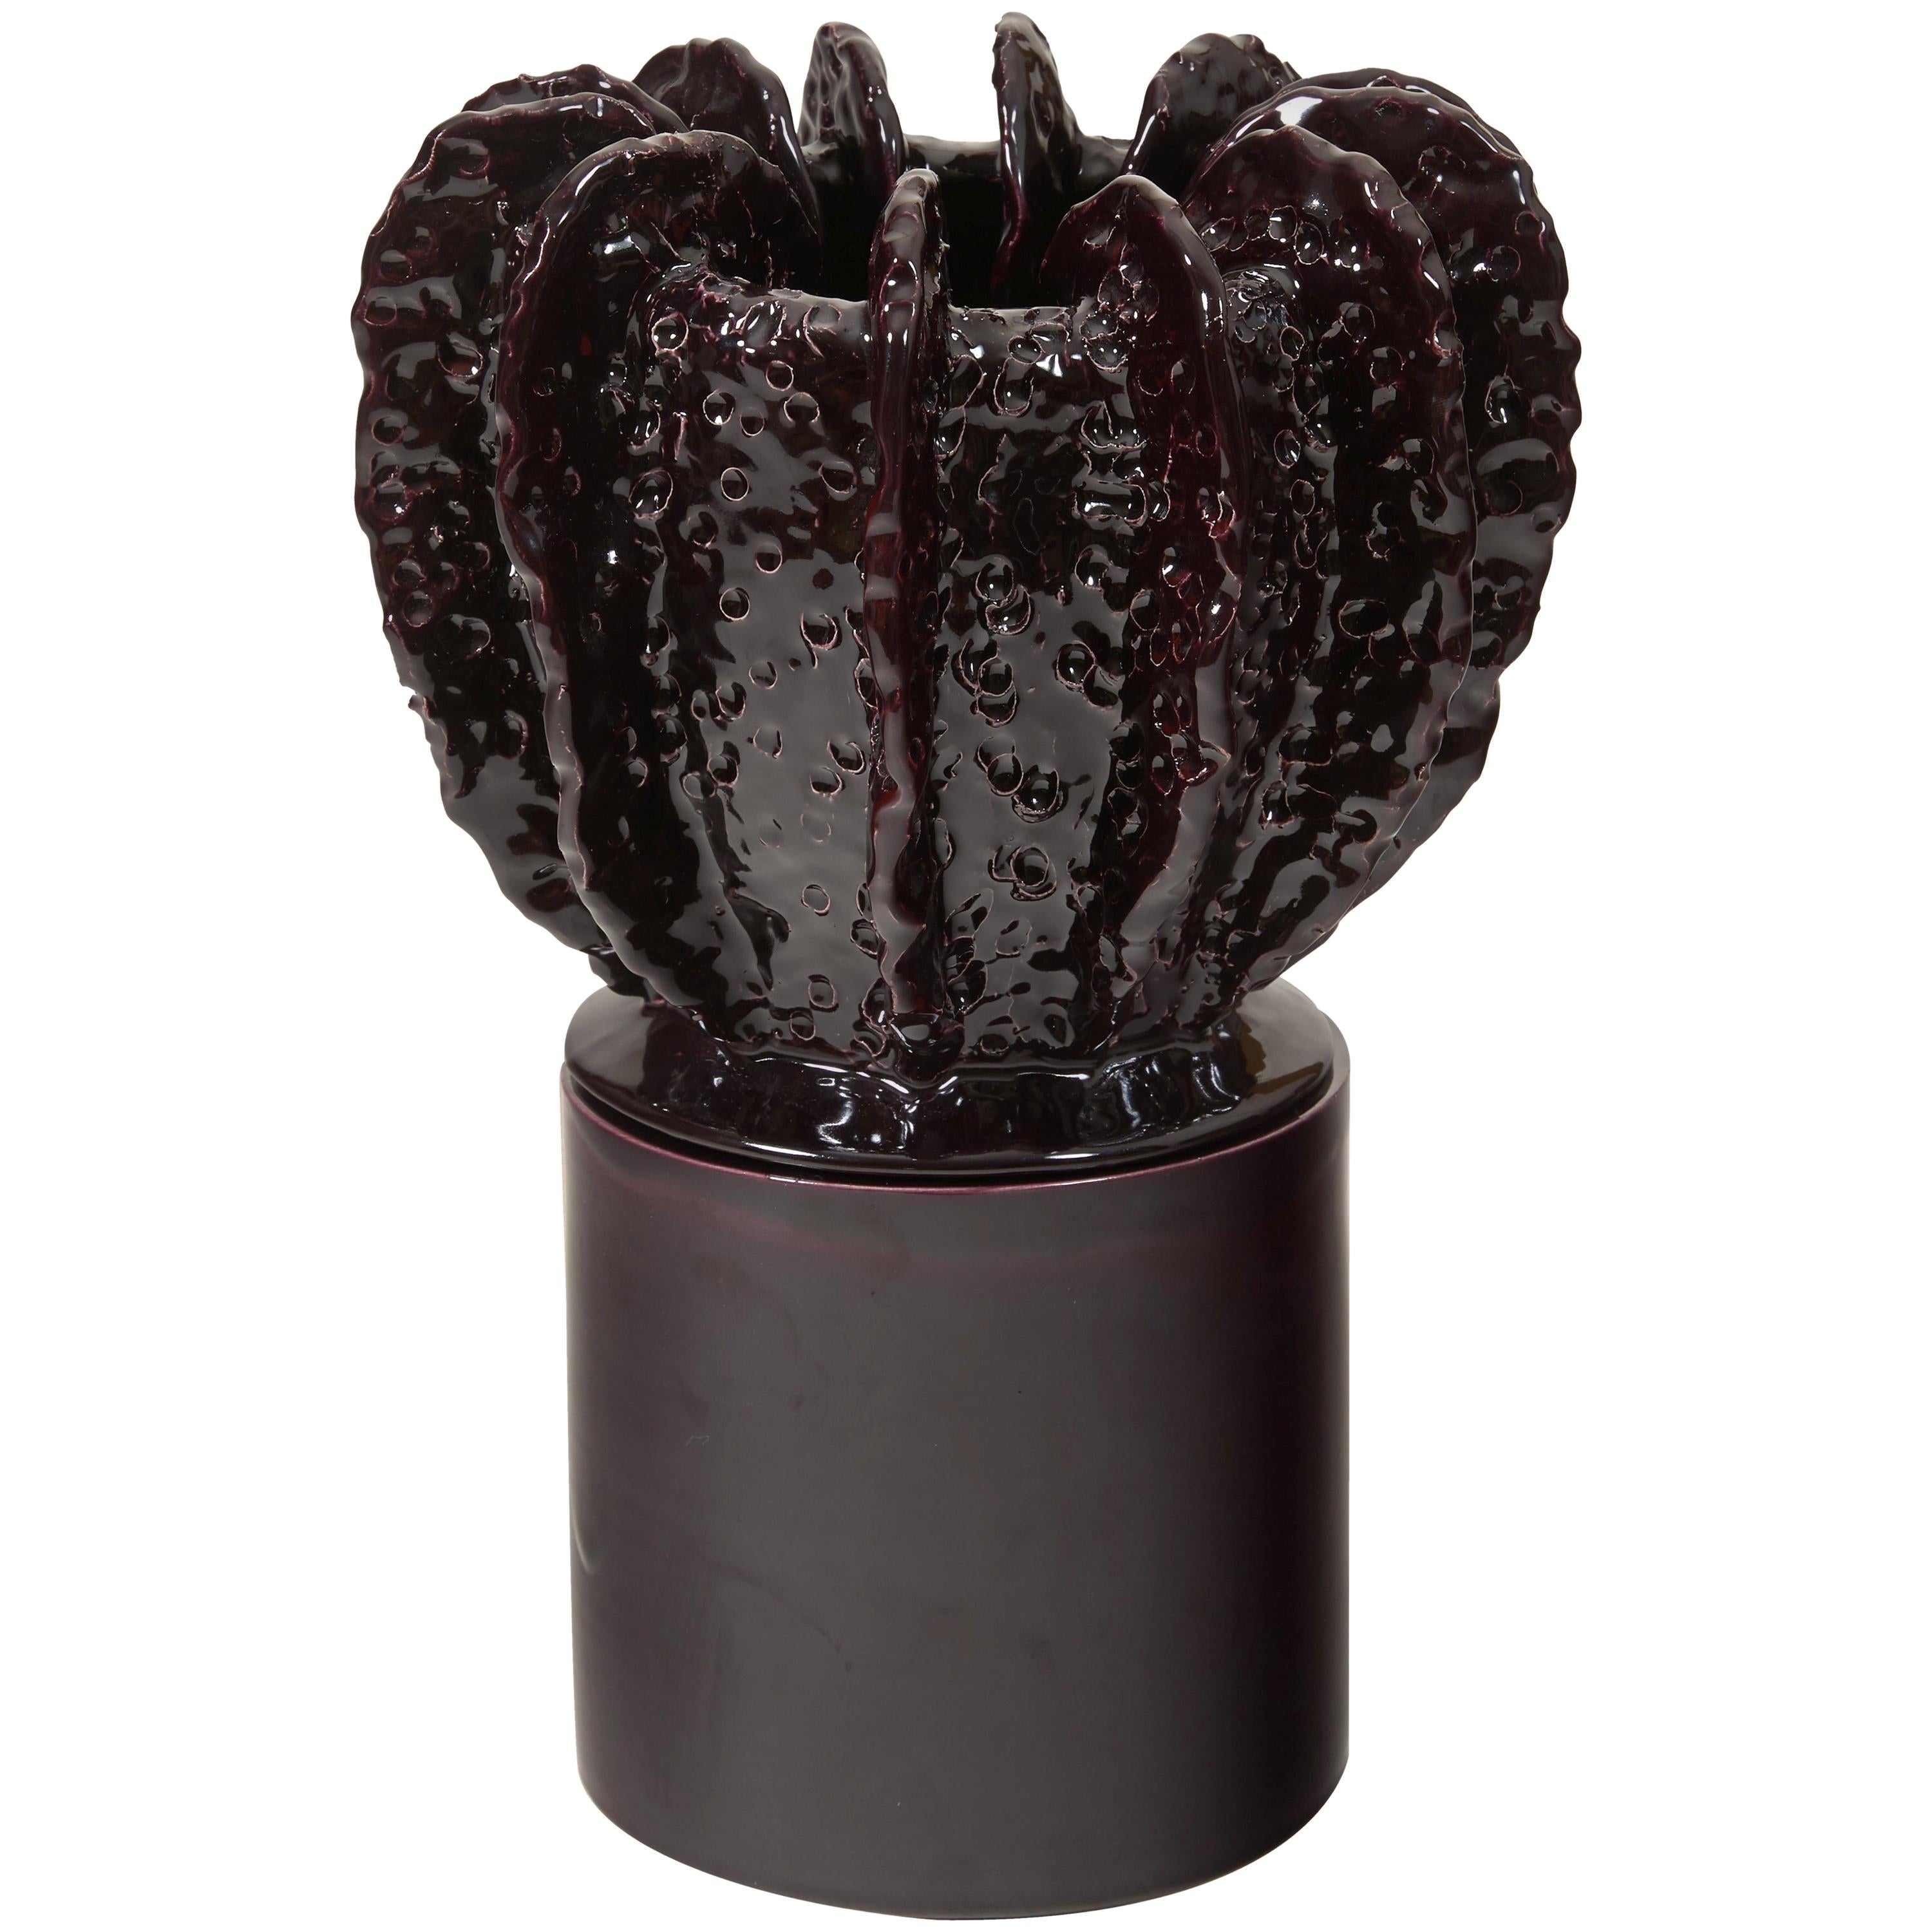 Glazed Purple Large Candleholder with Sculpted Lid by Laura Gonzalez